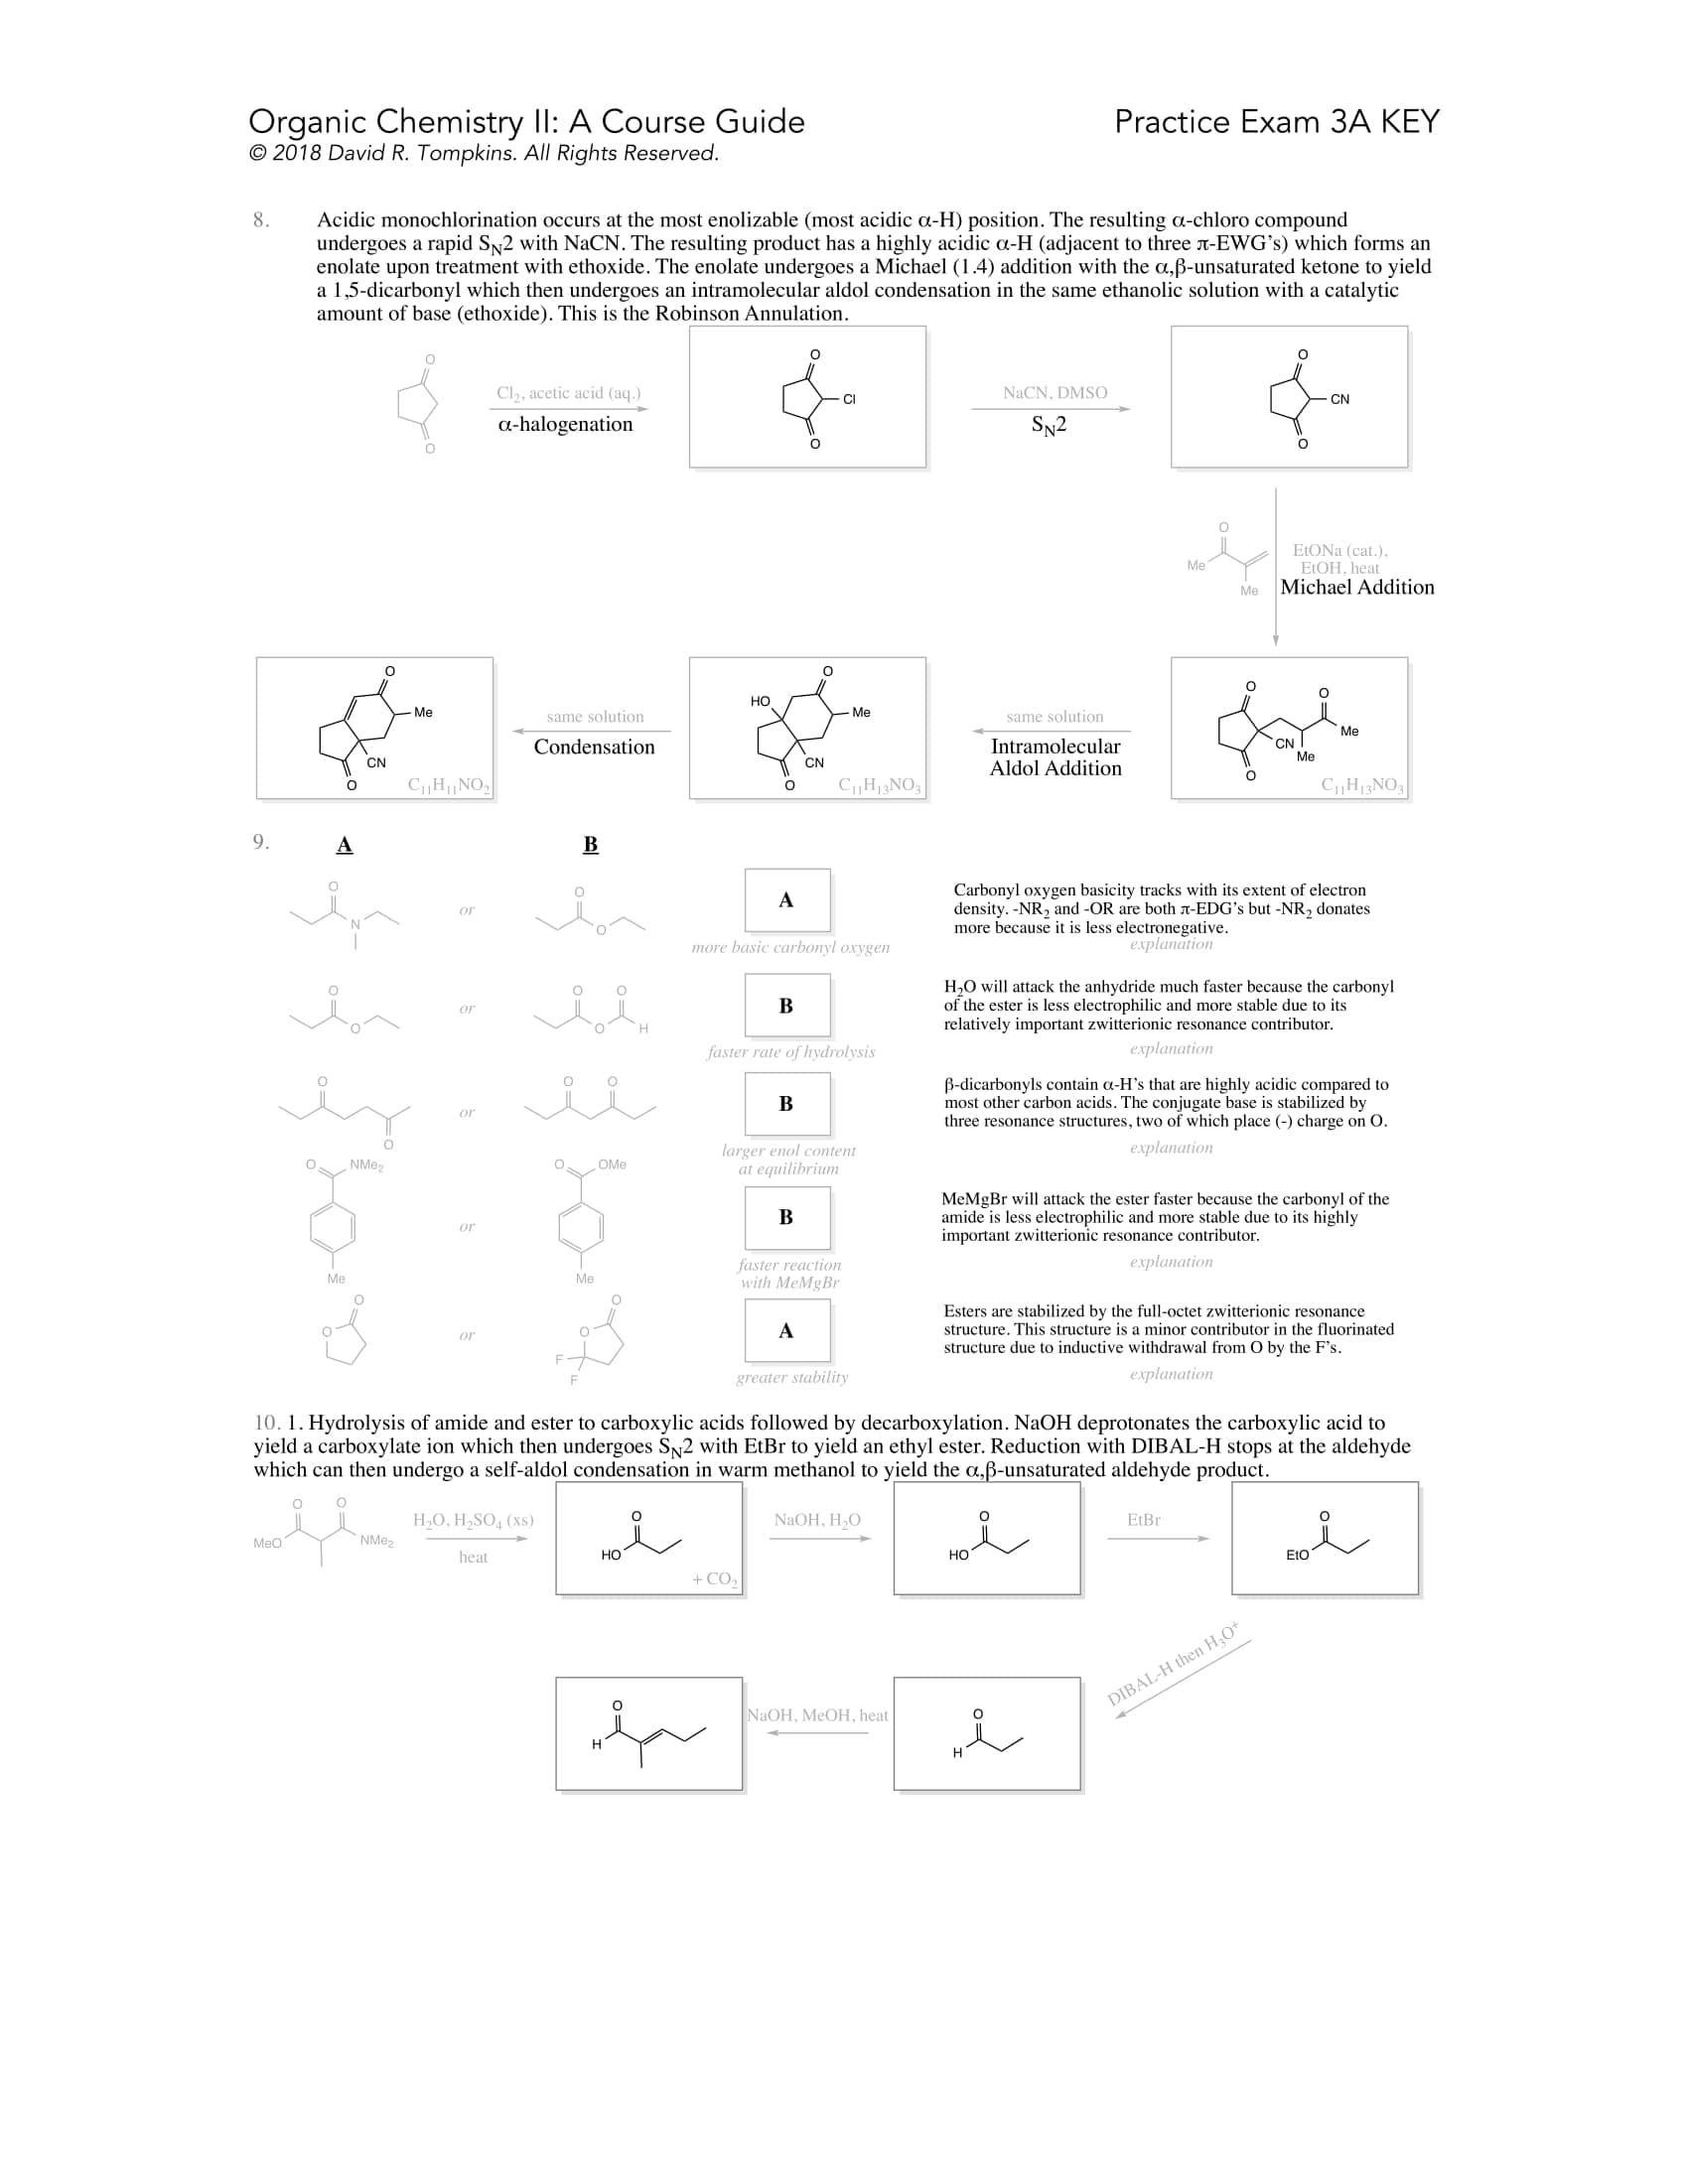 Introduction to Organic Chemistry II Course Guide Example Page 6